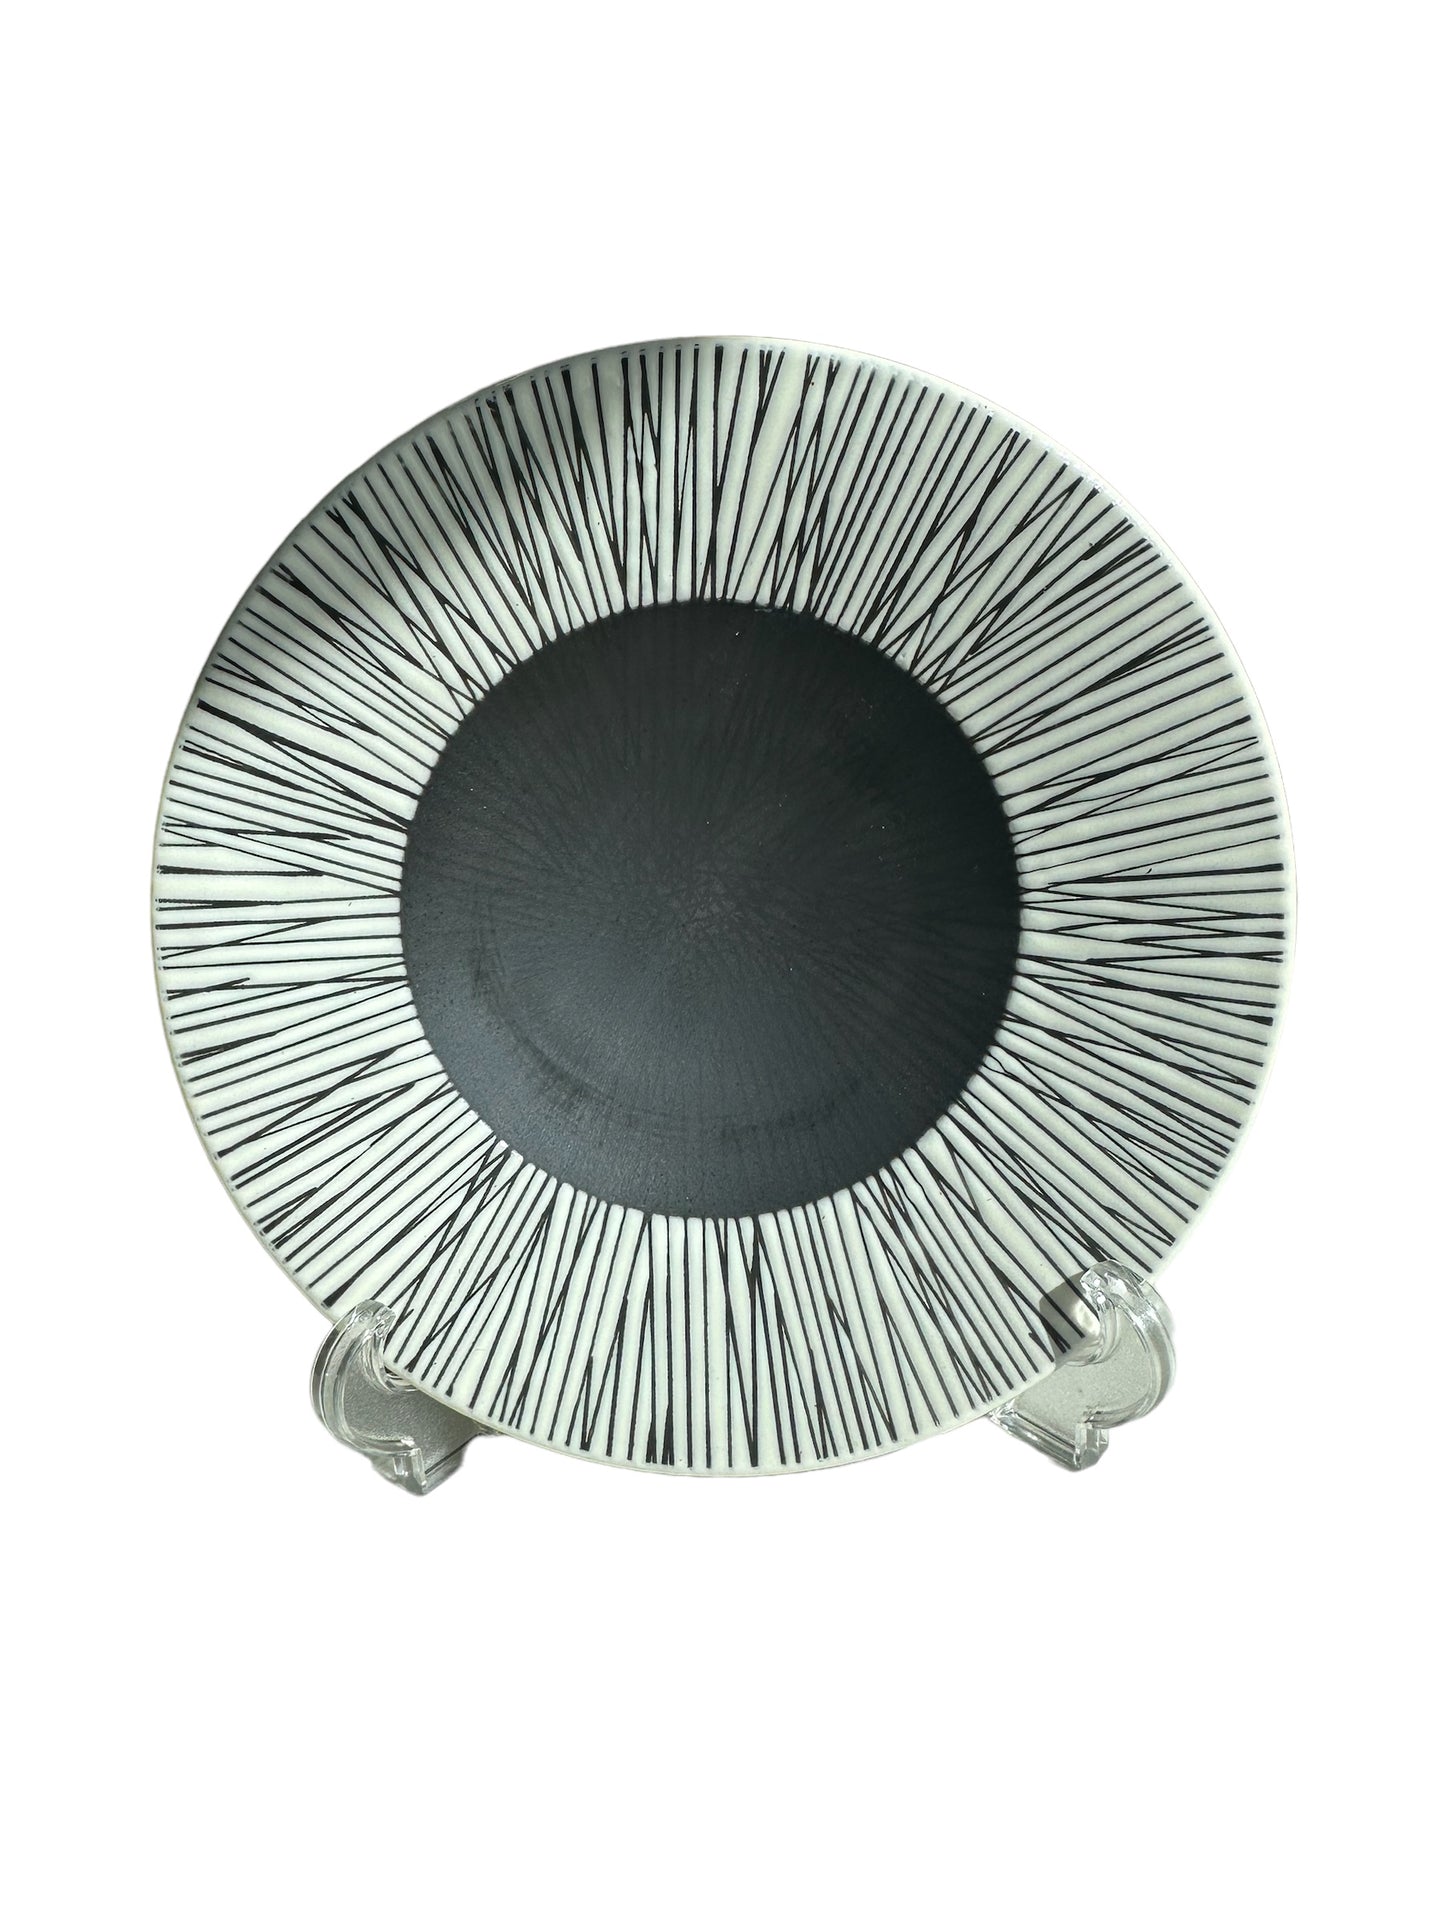 Radial pattern of black lines on 8" decorative plates